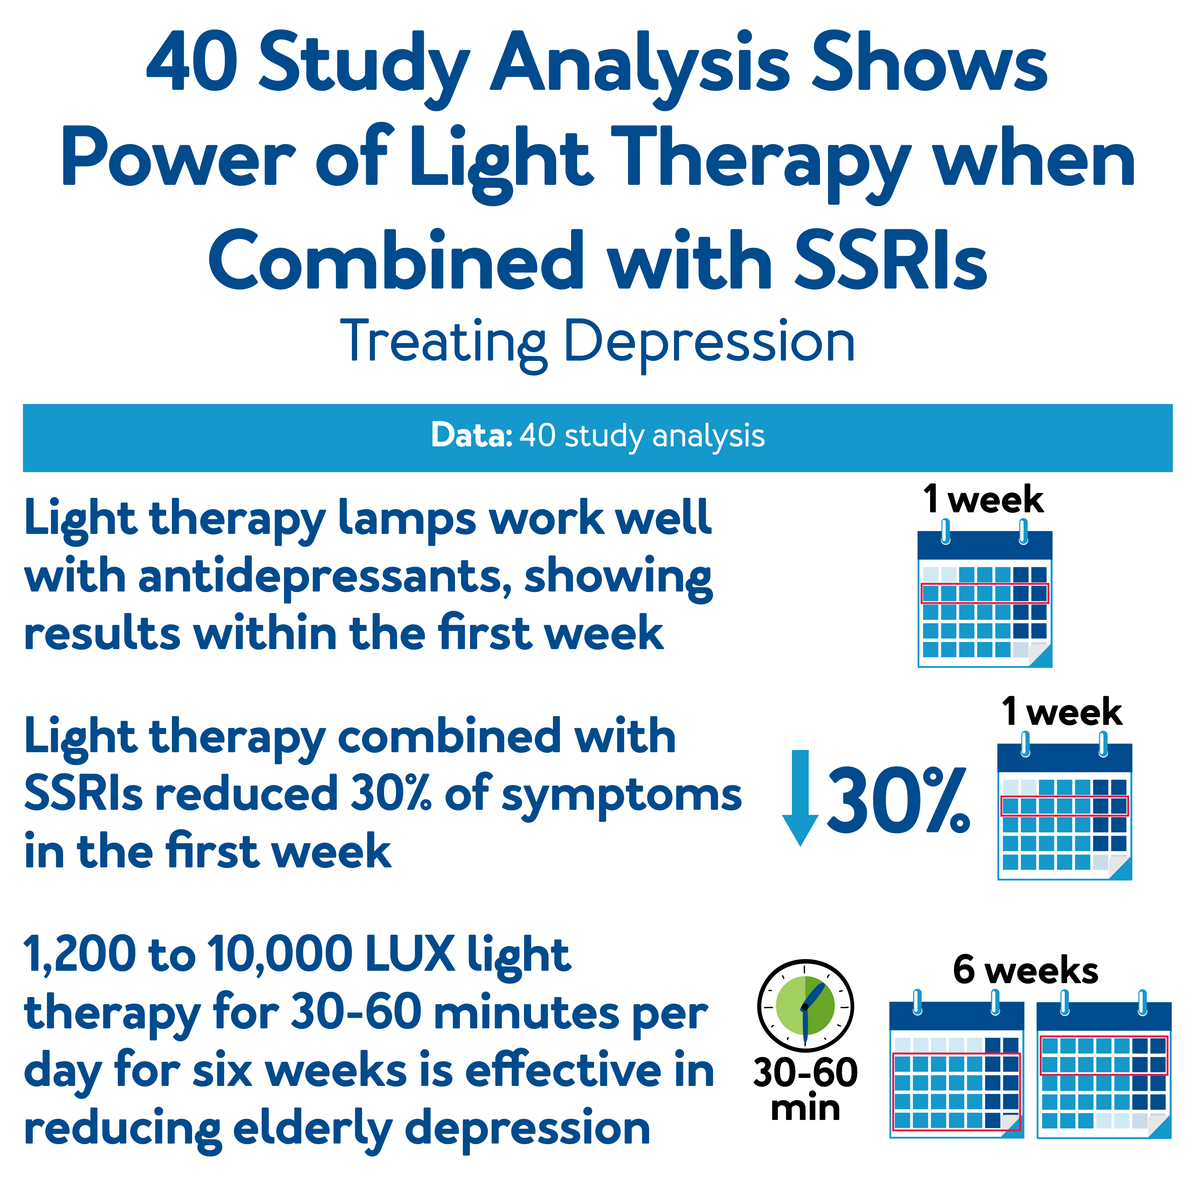 40 Study Analysis Shows Power of Light Therapy when Combined with SSRIs, further details are provided below.